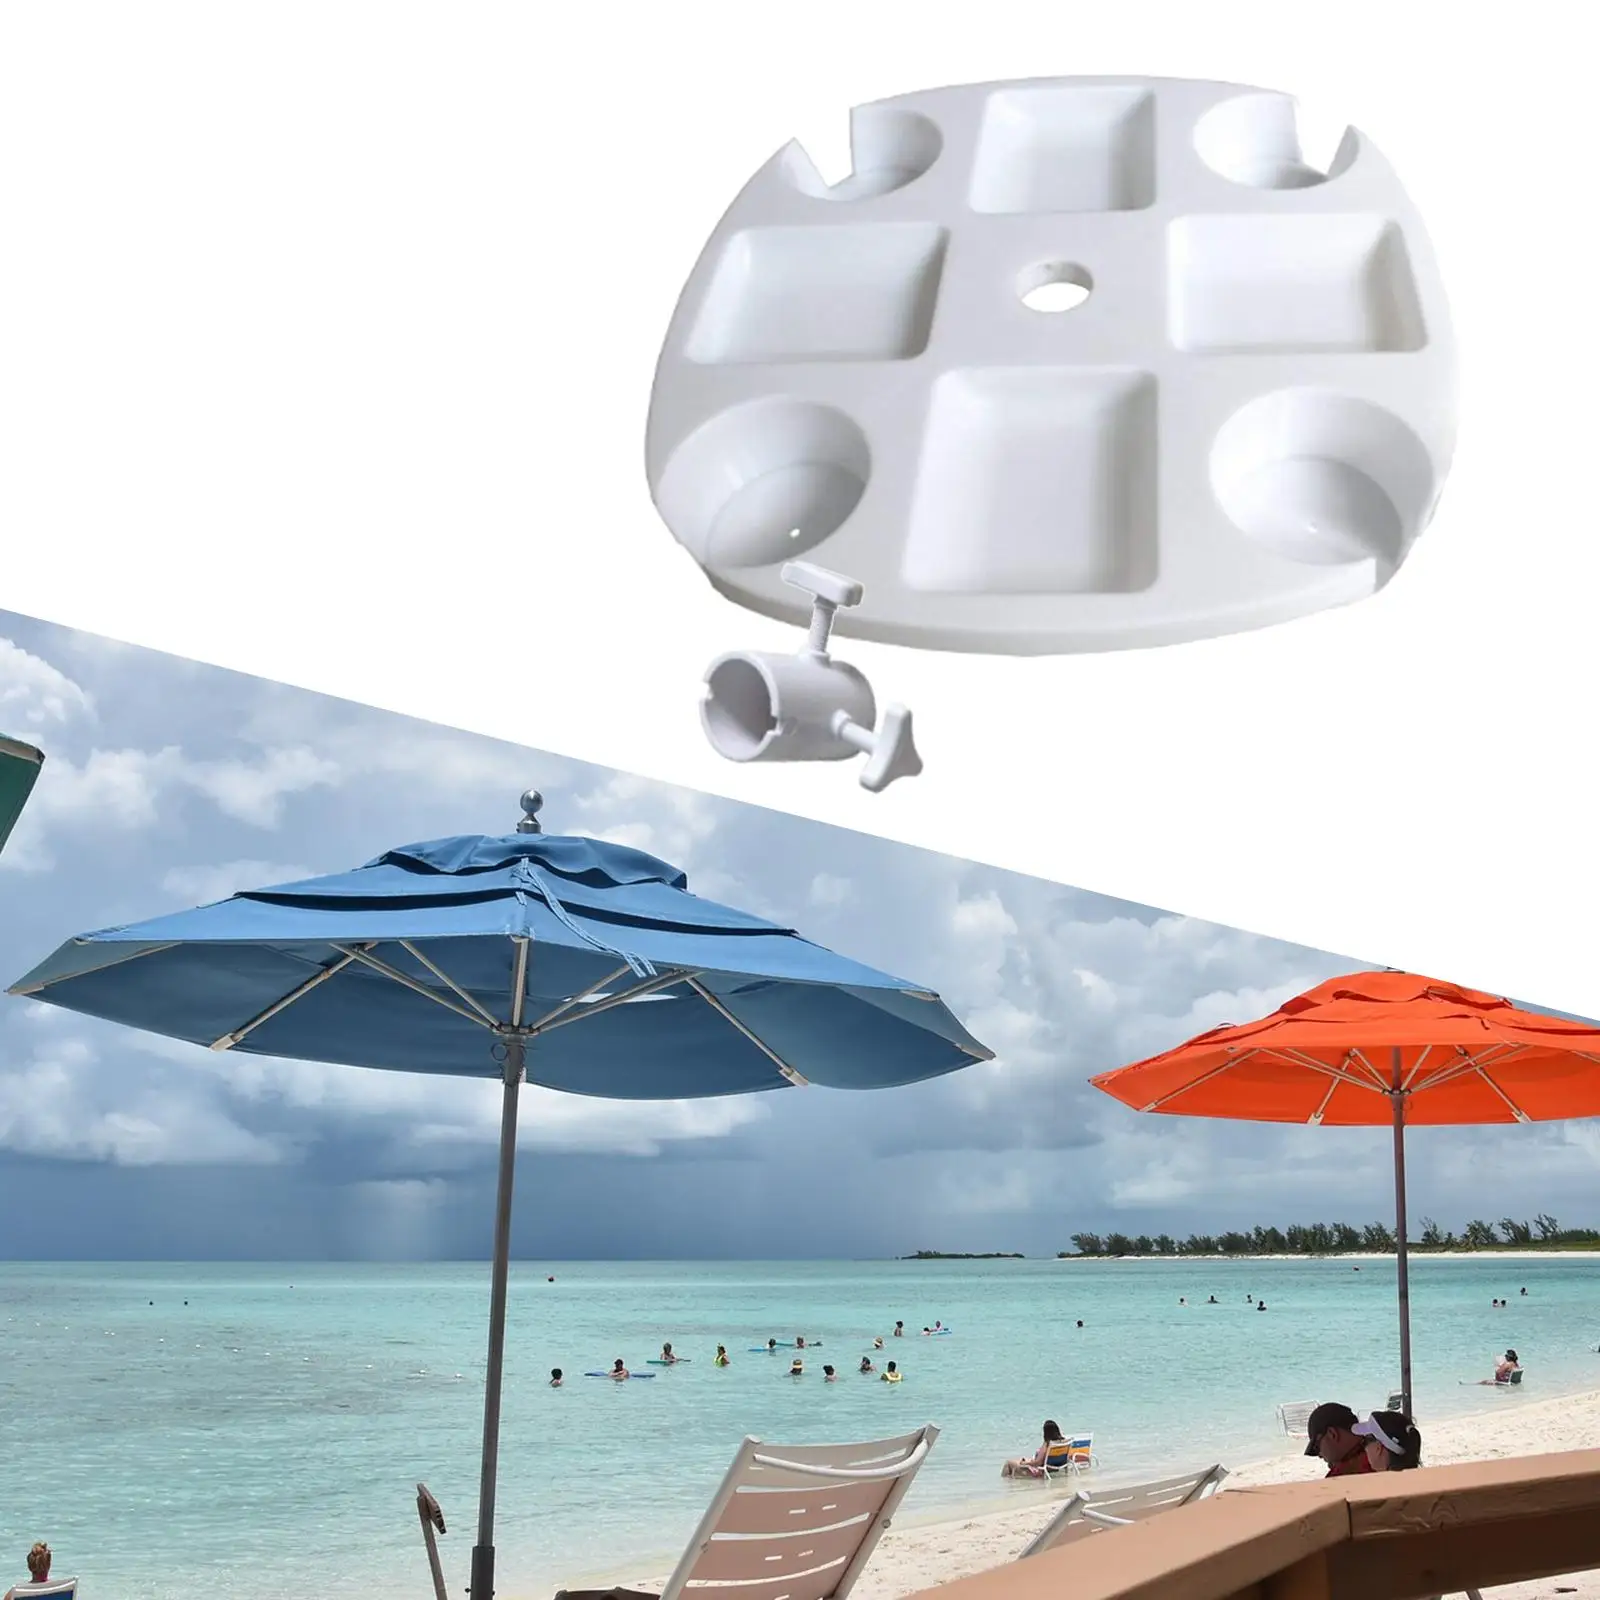 Outdoor Beach Umbrella Table Tray with 4 Cup Holders Snack Drink Holder